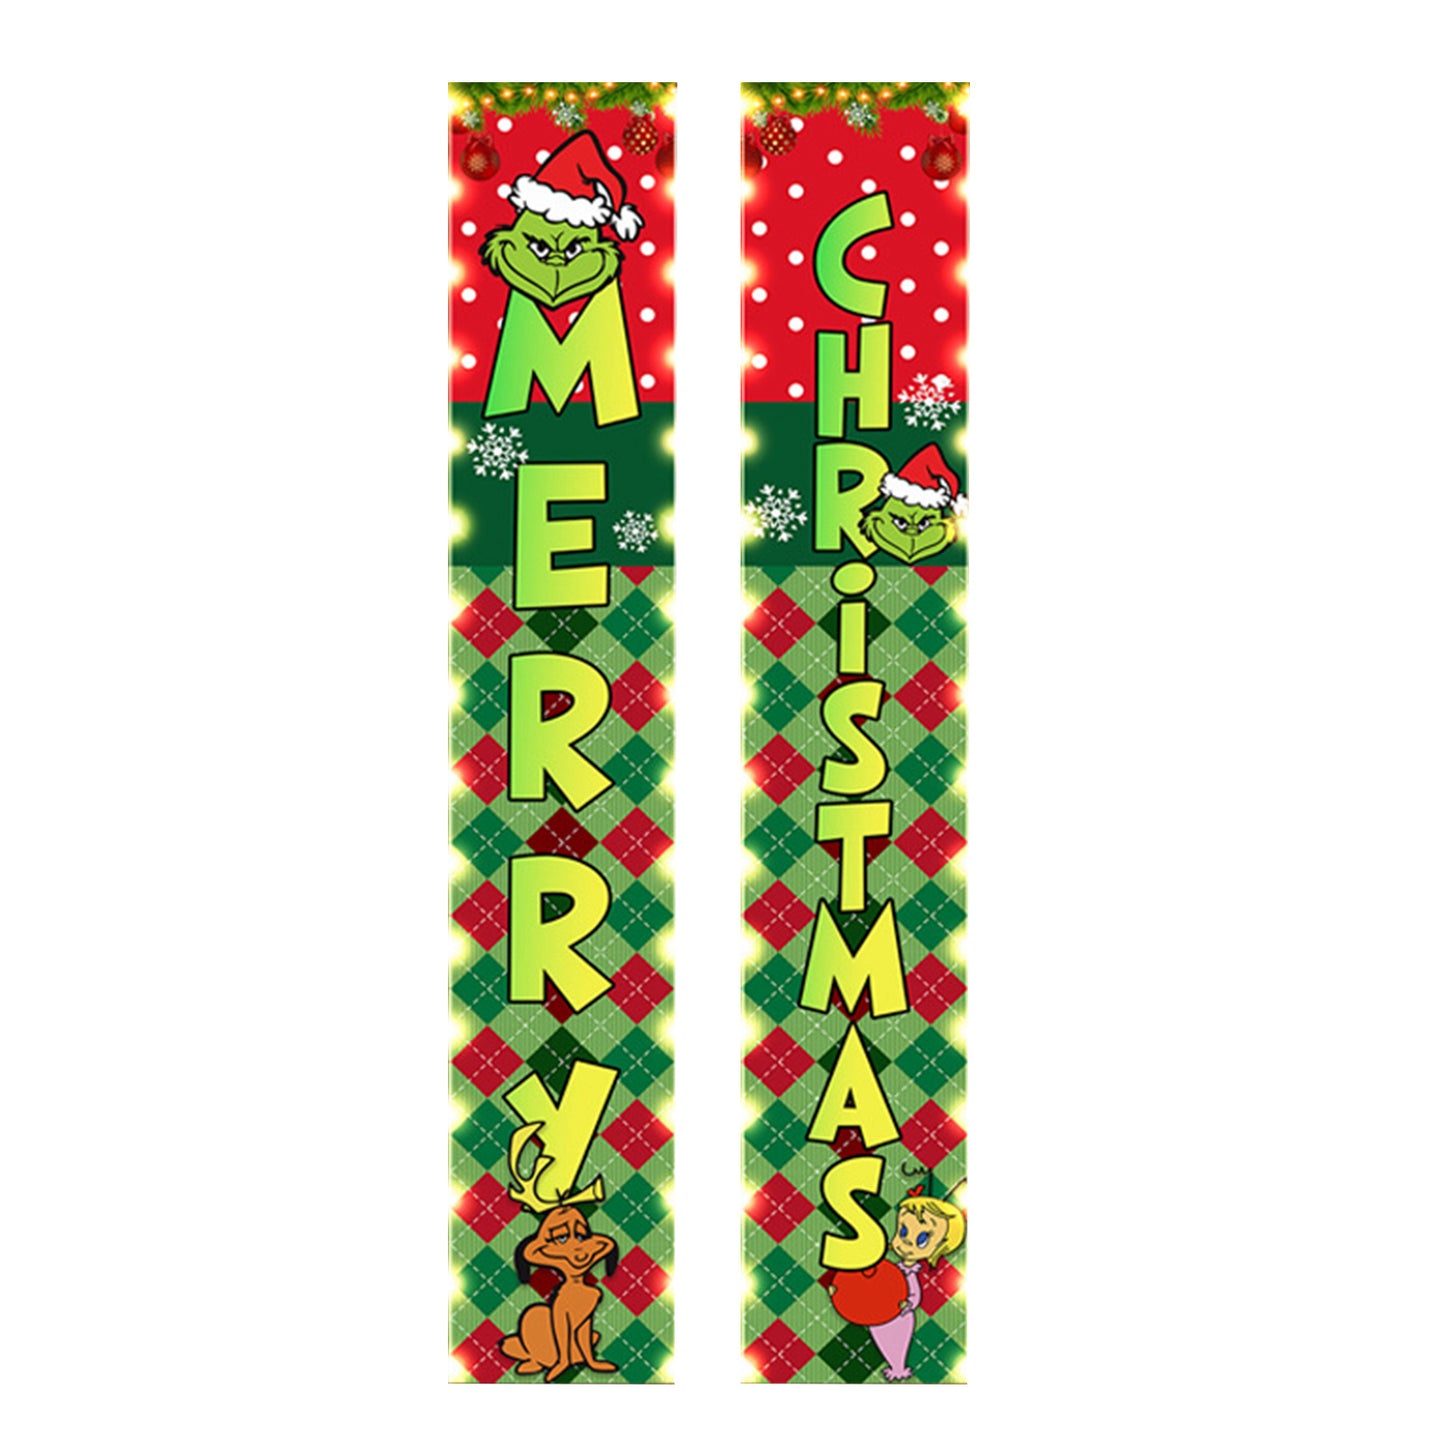 Christmas decorations, Christmas porch sign with colored lights, Christmas door banner